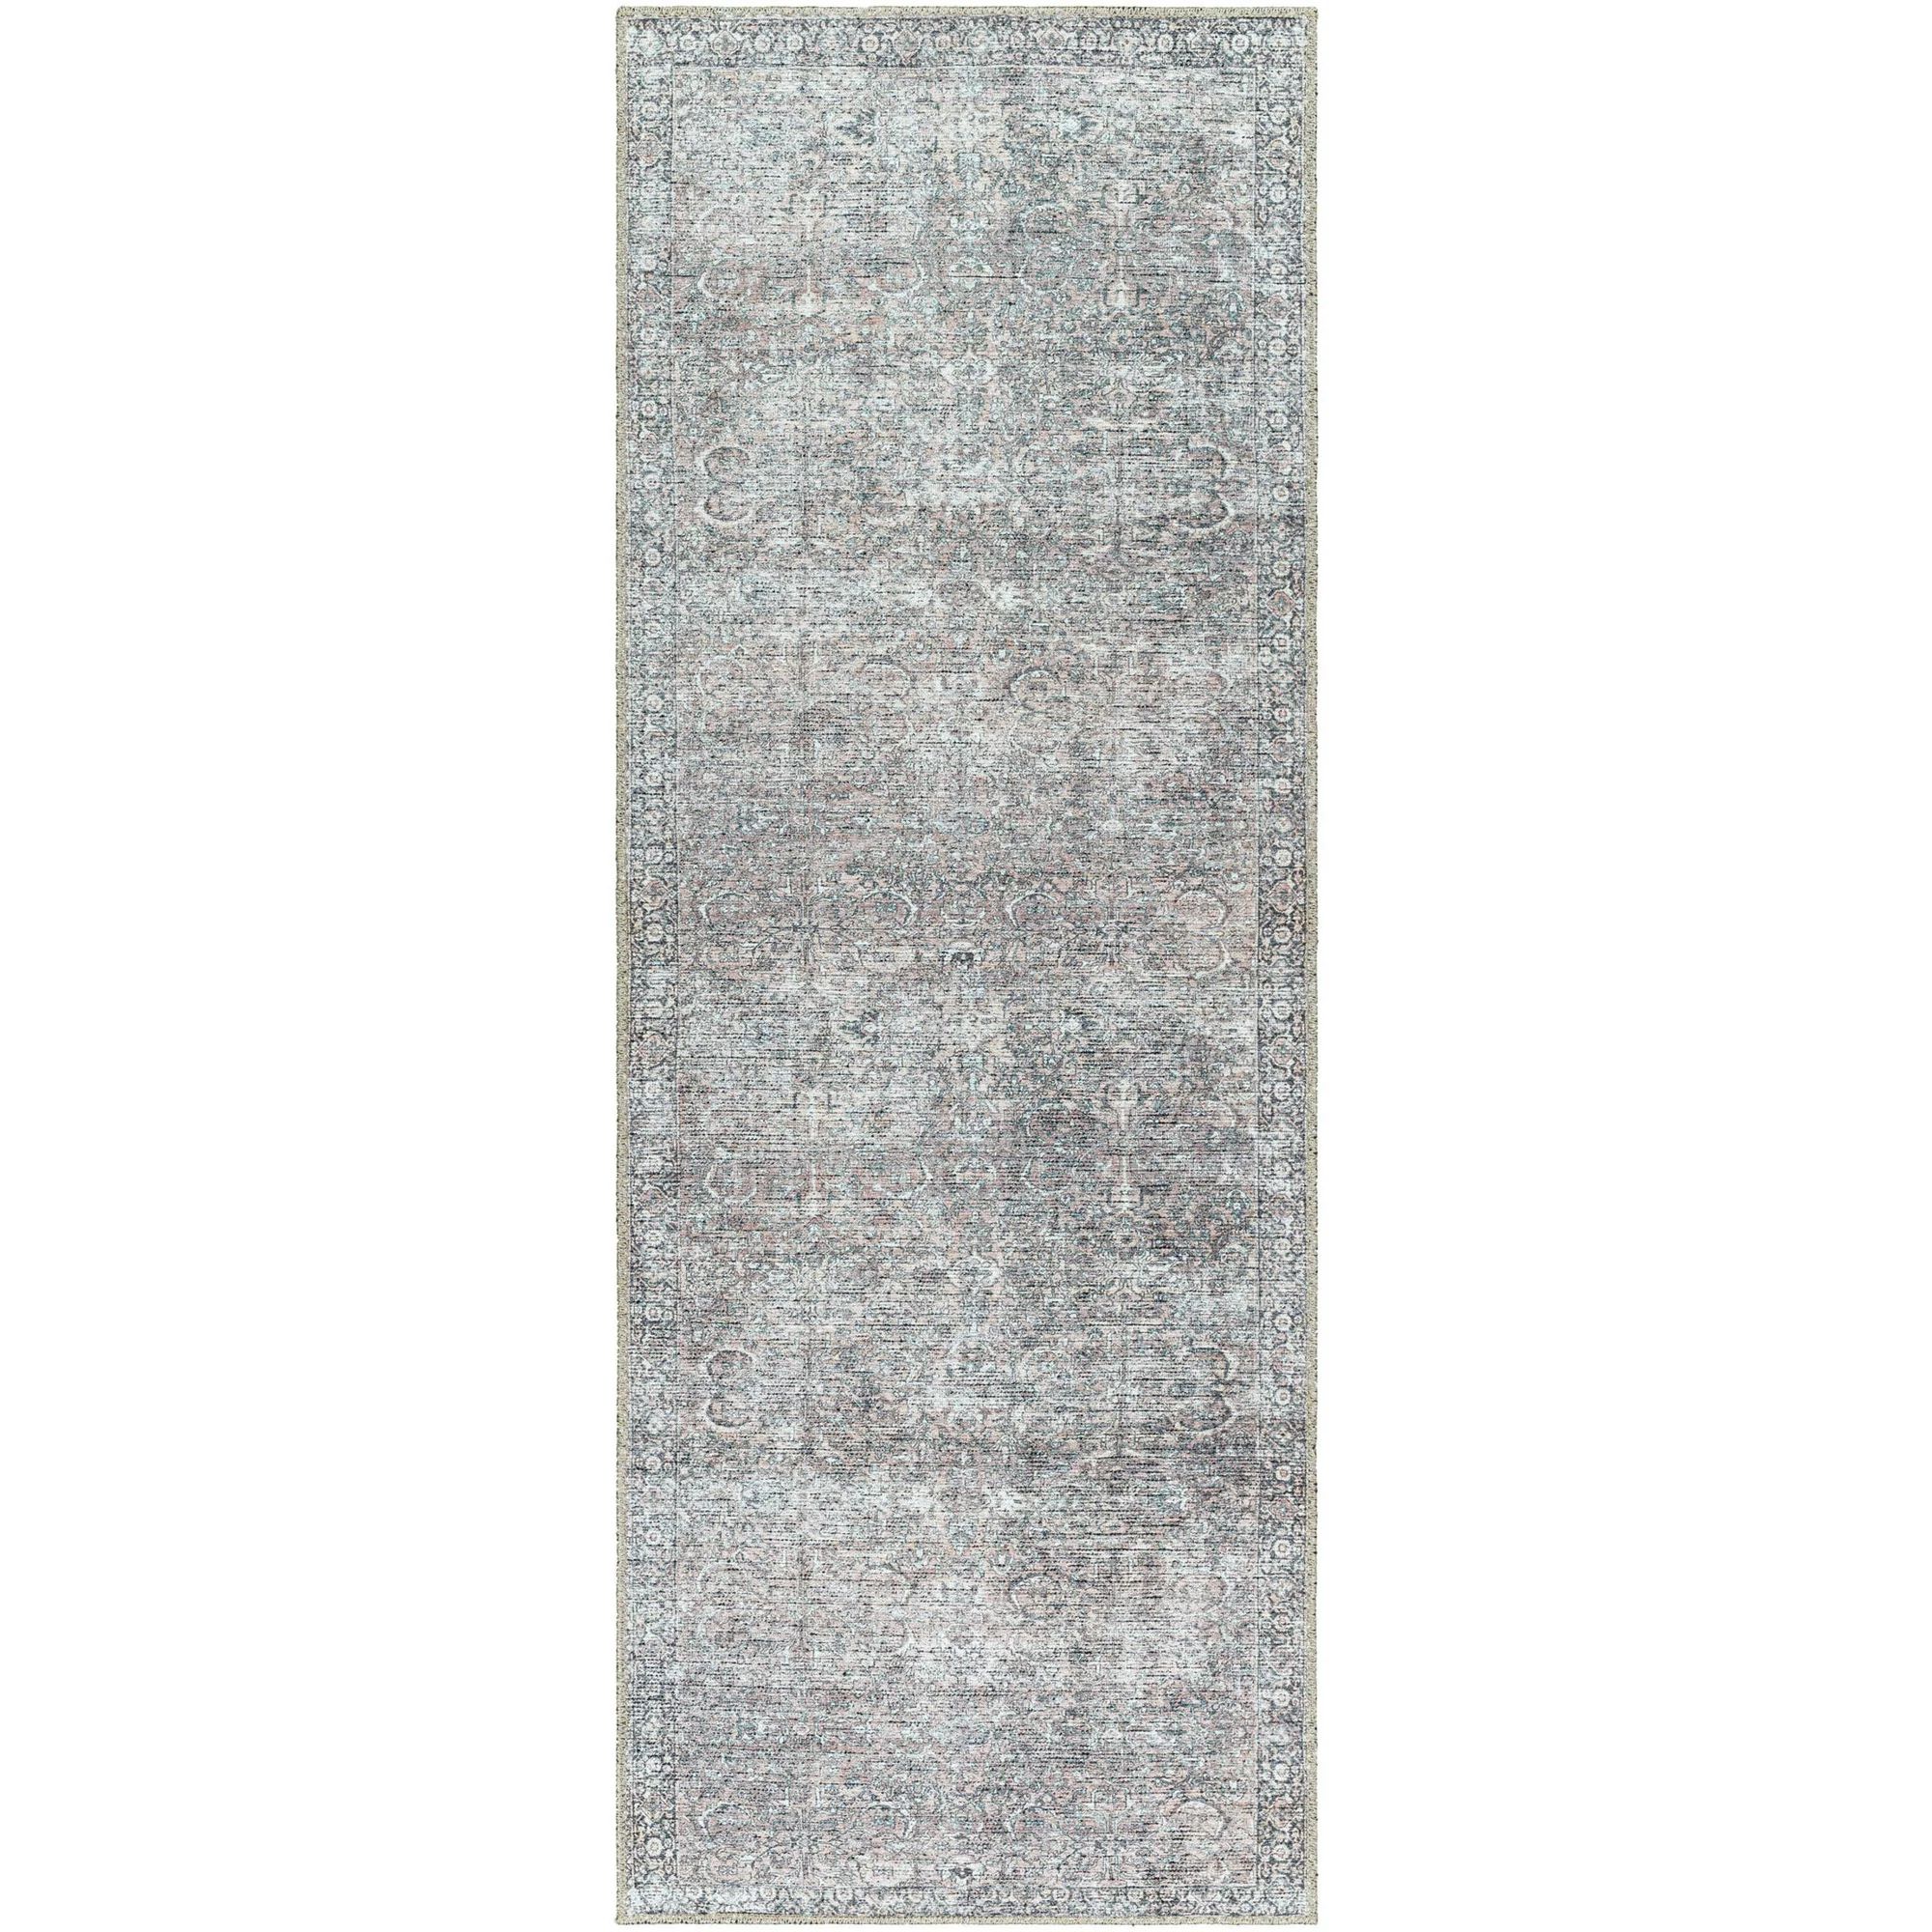 Better Homes & Gardens Persian Blooms Runner Washable Non-Skid Area Rug, Brown, 2'5" x 7' | Walmart (US)